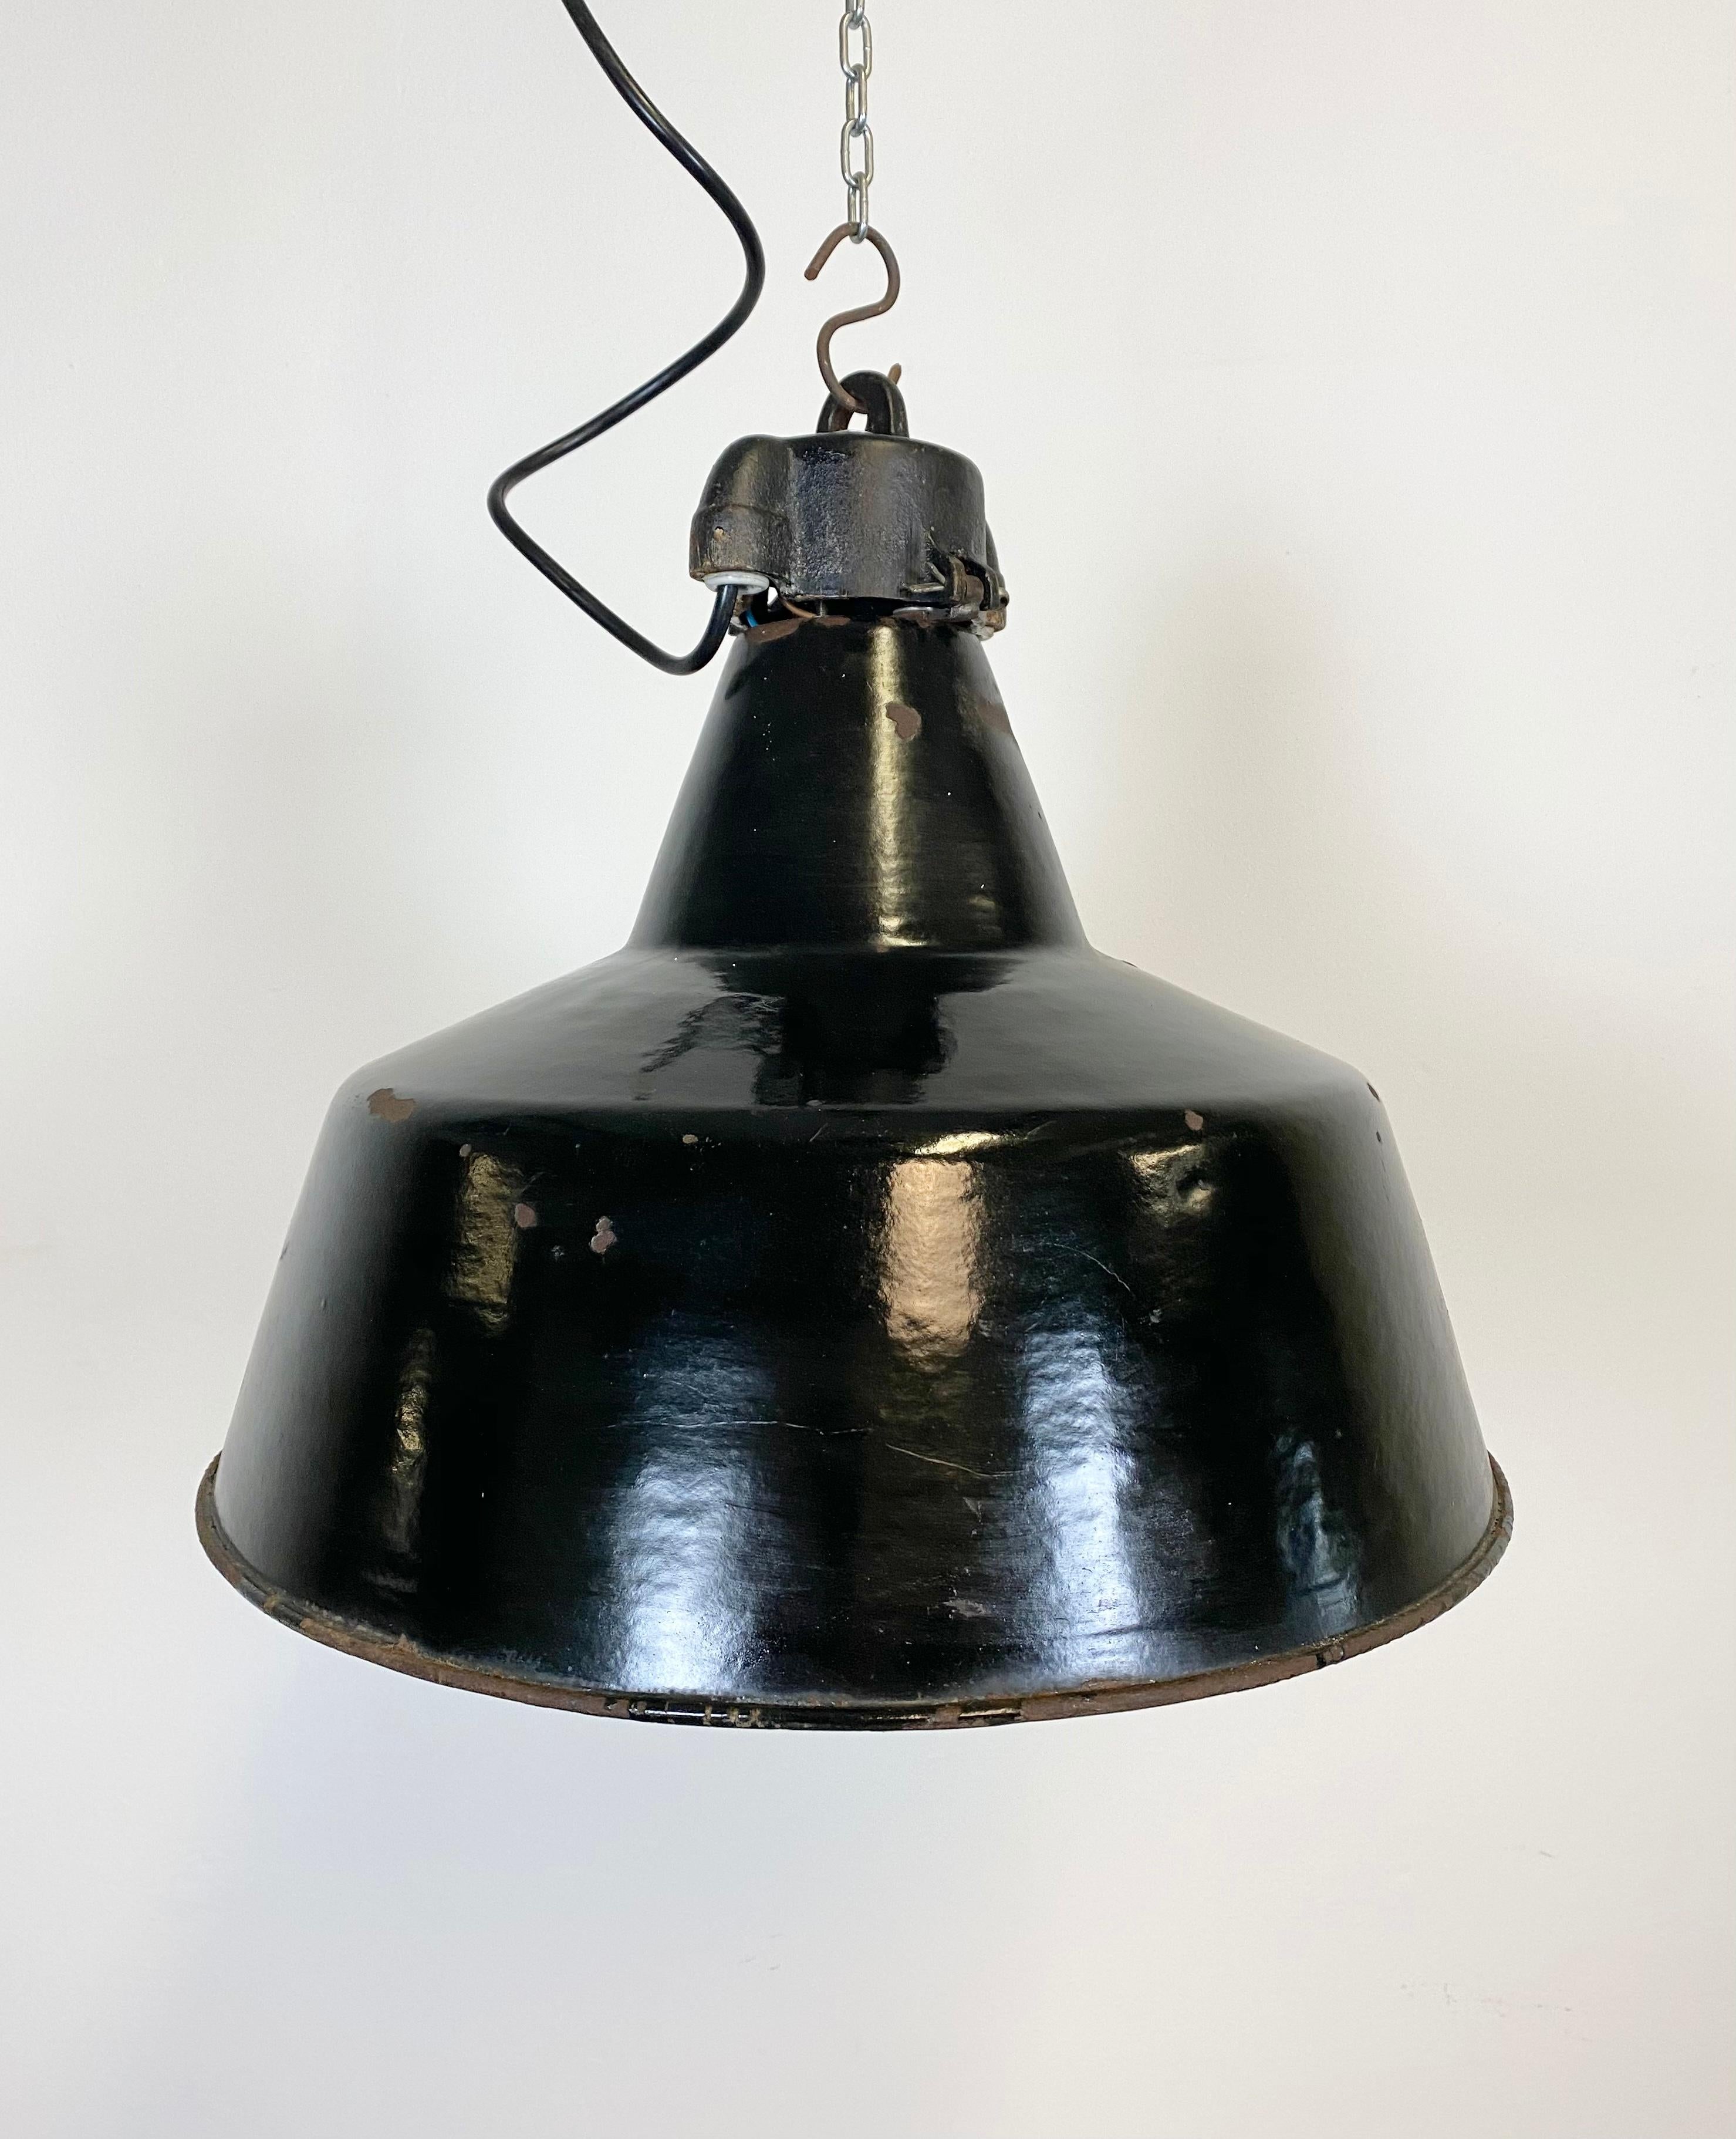 Vintage Industrial black enamel lamp made by Elektrosvit in former Czechoslovakia during the 1970s. White enamel interior. Cast iron top. New porcelain socket for E 27 lightbulbs and wire. The weight of the lamp is 2.5 kg.